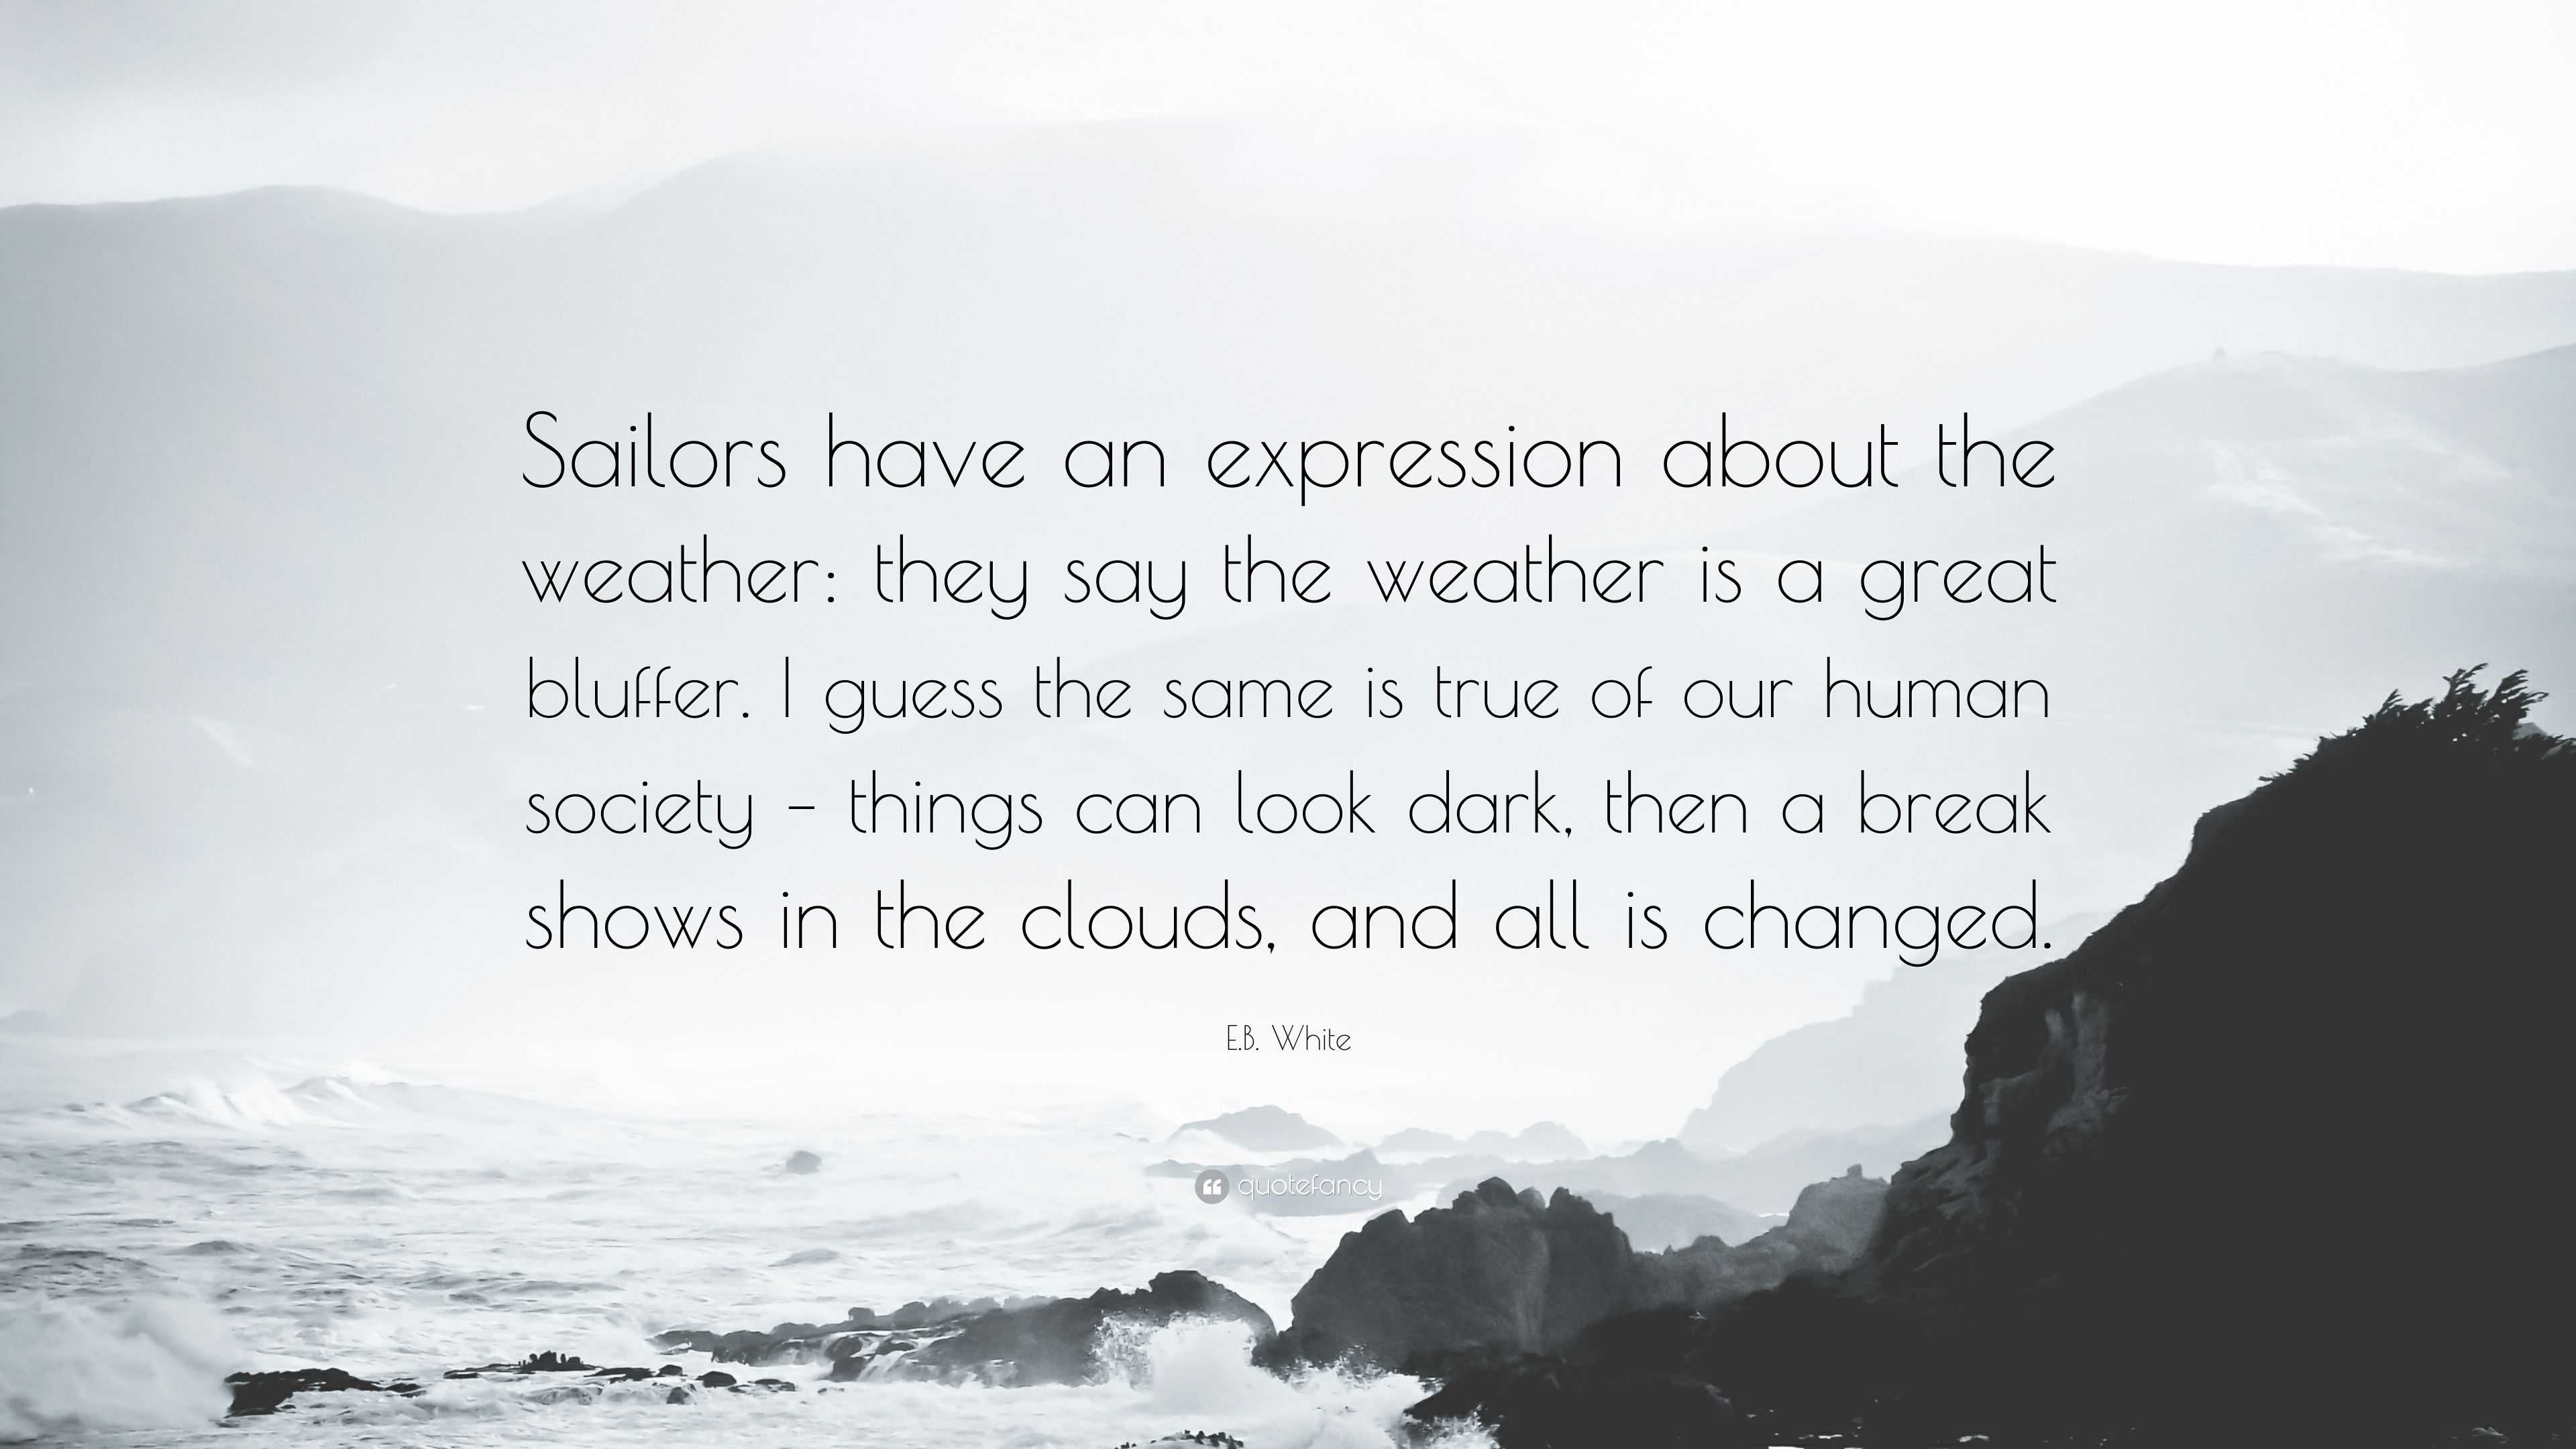 E.B. White Quote: “Sailors an expression about the weather: they say the weather is a great bluffer. I guess the same is of our h...”